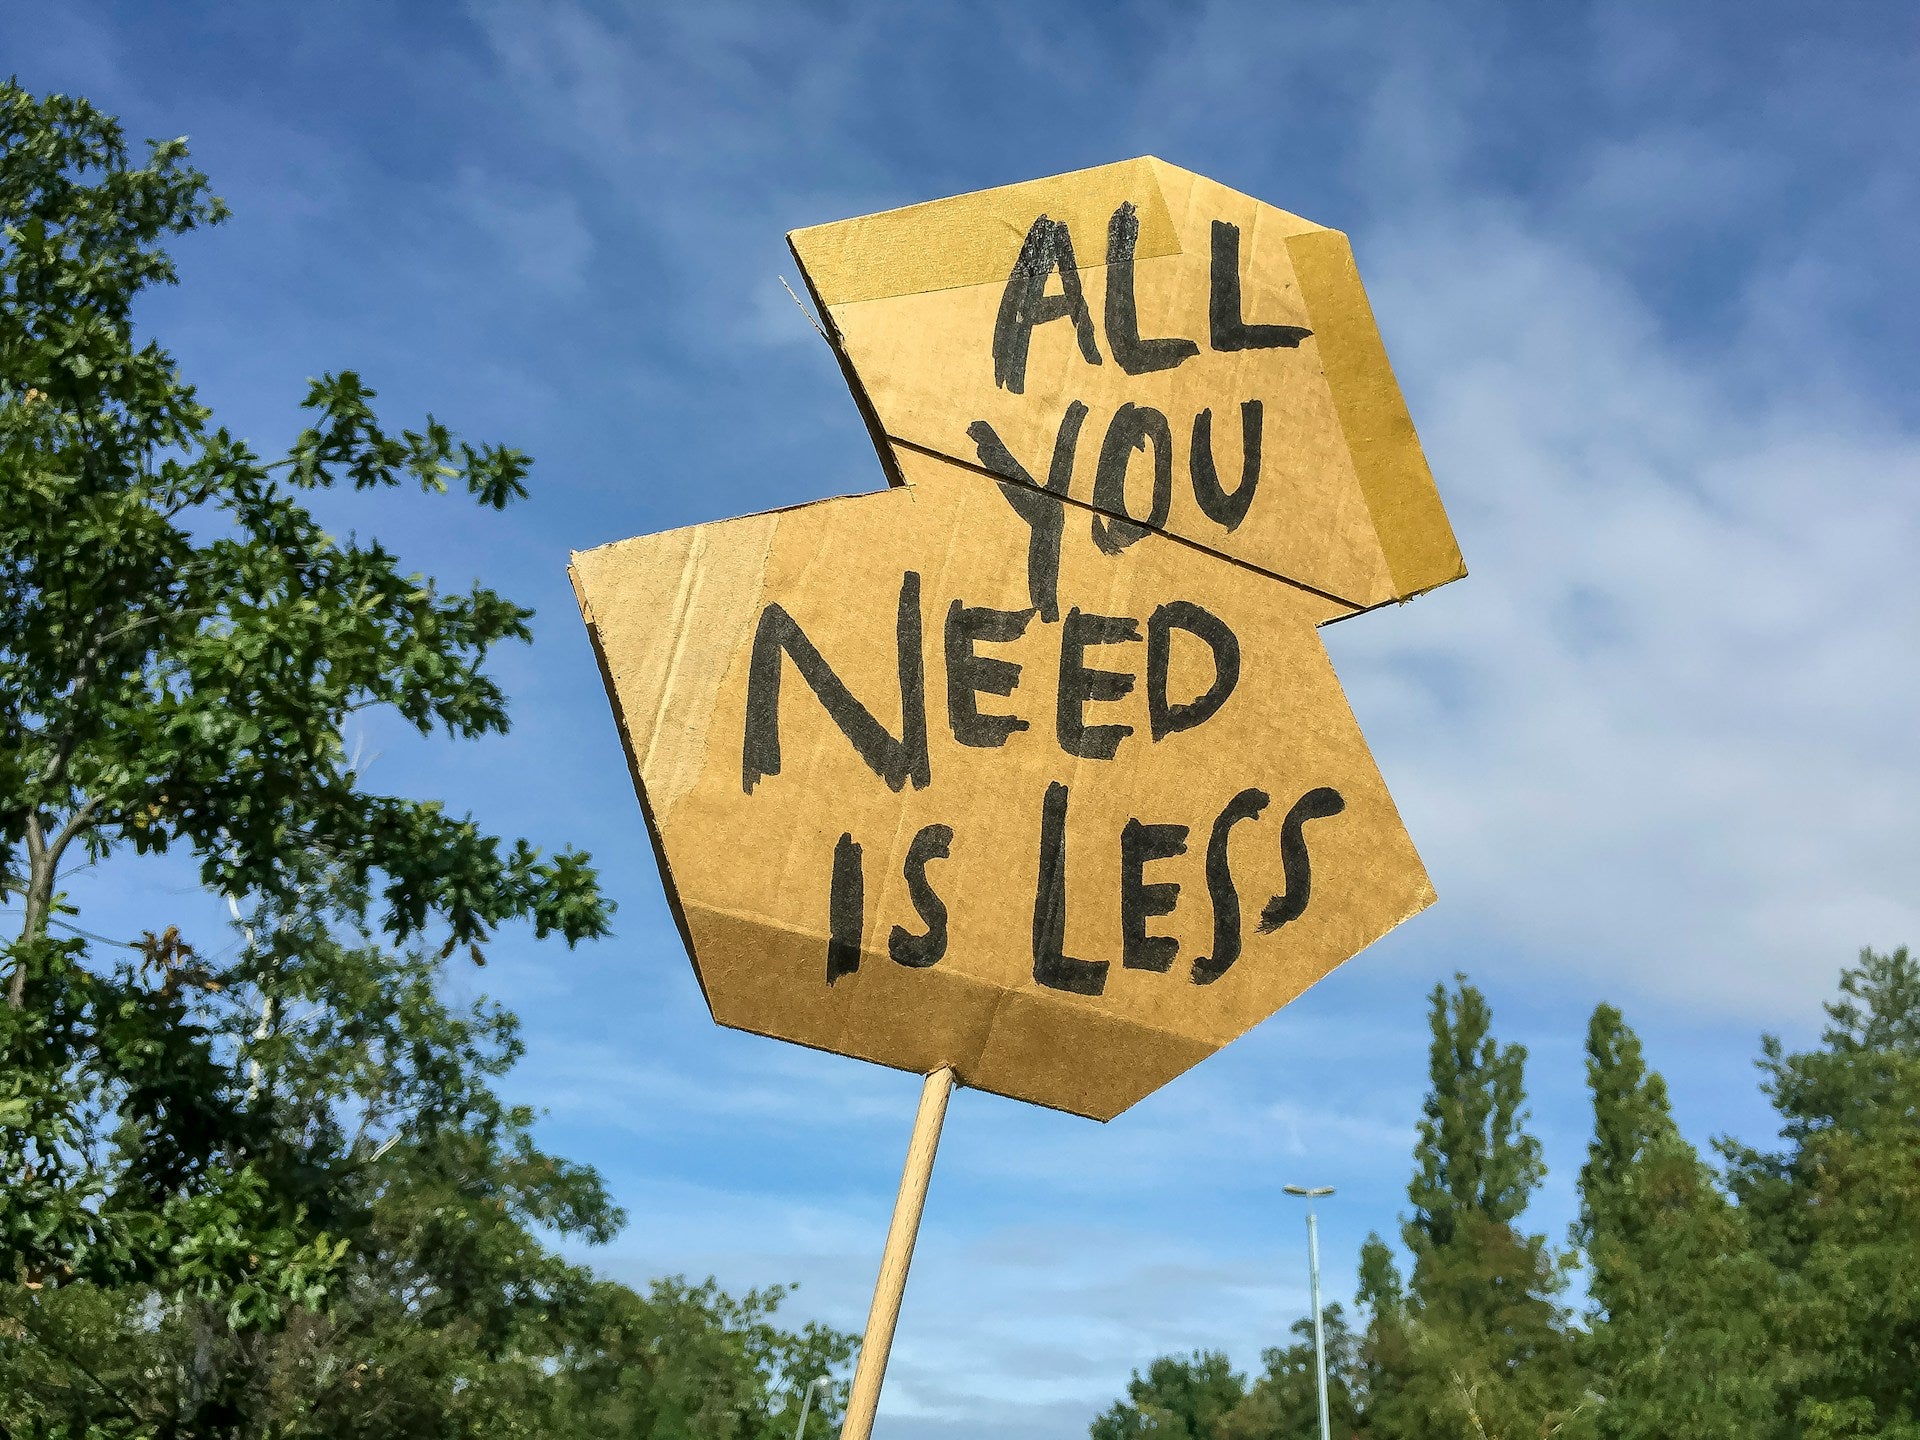 A cardboard sign that reads "All you need is less."